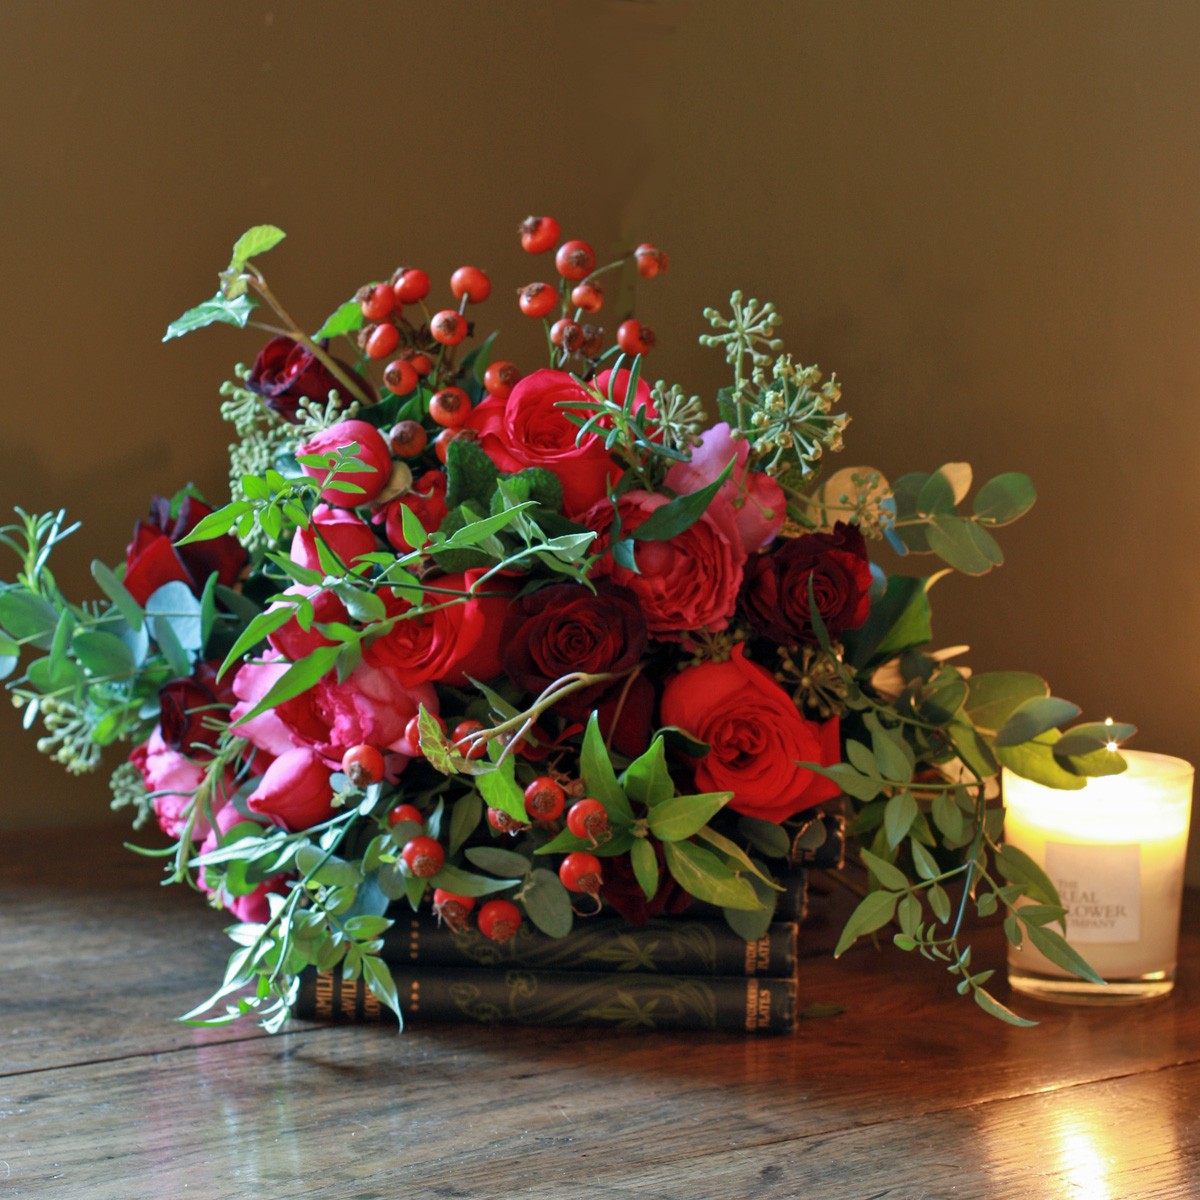 Floral Festivity for the Christmas Season - Easy Home Concepts